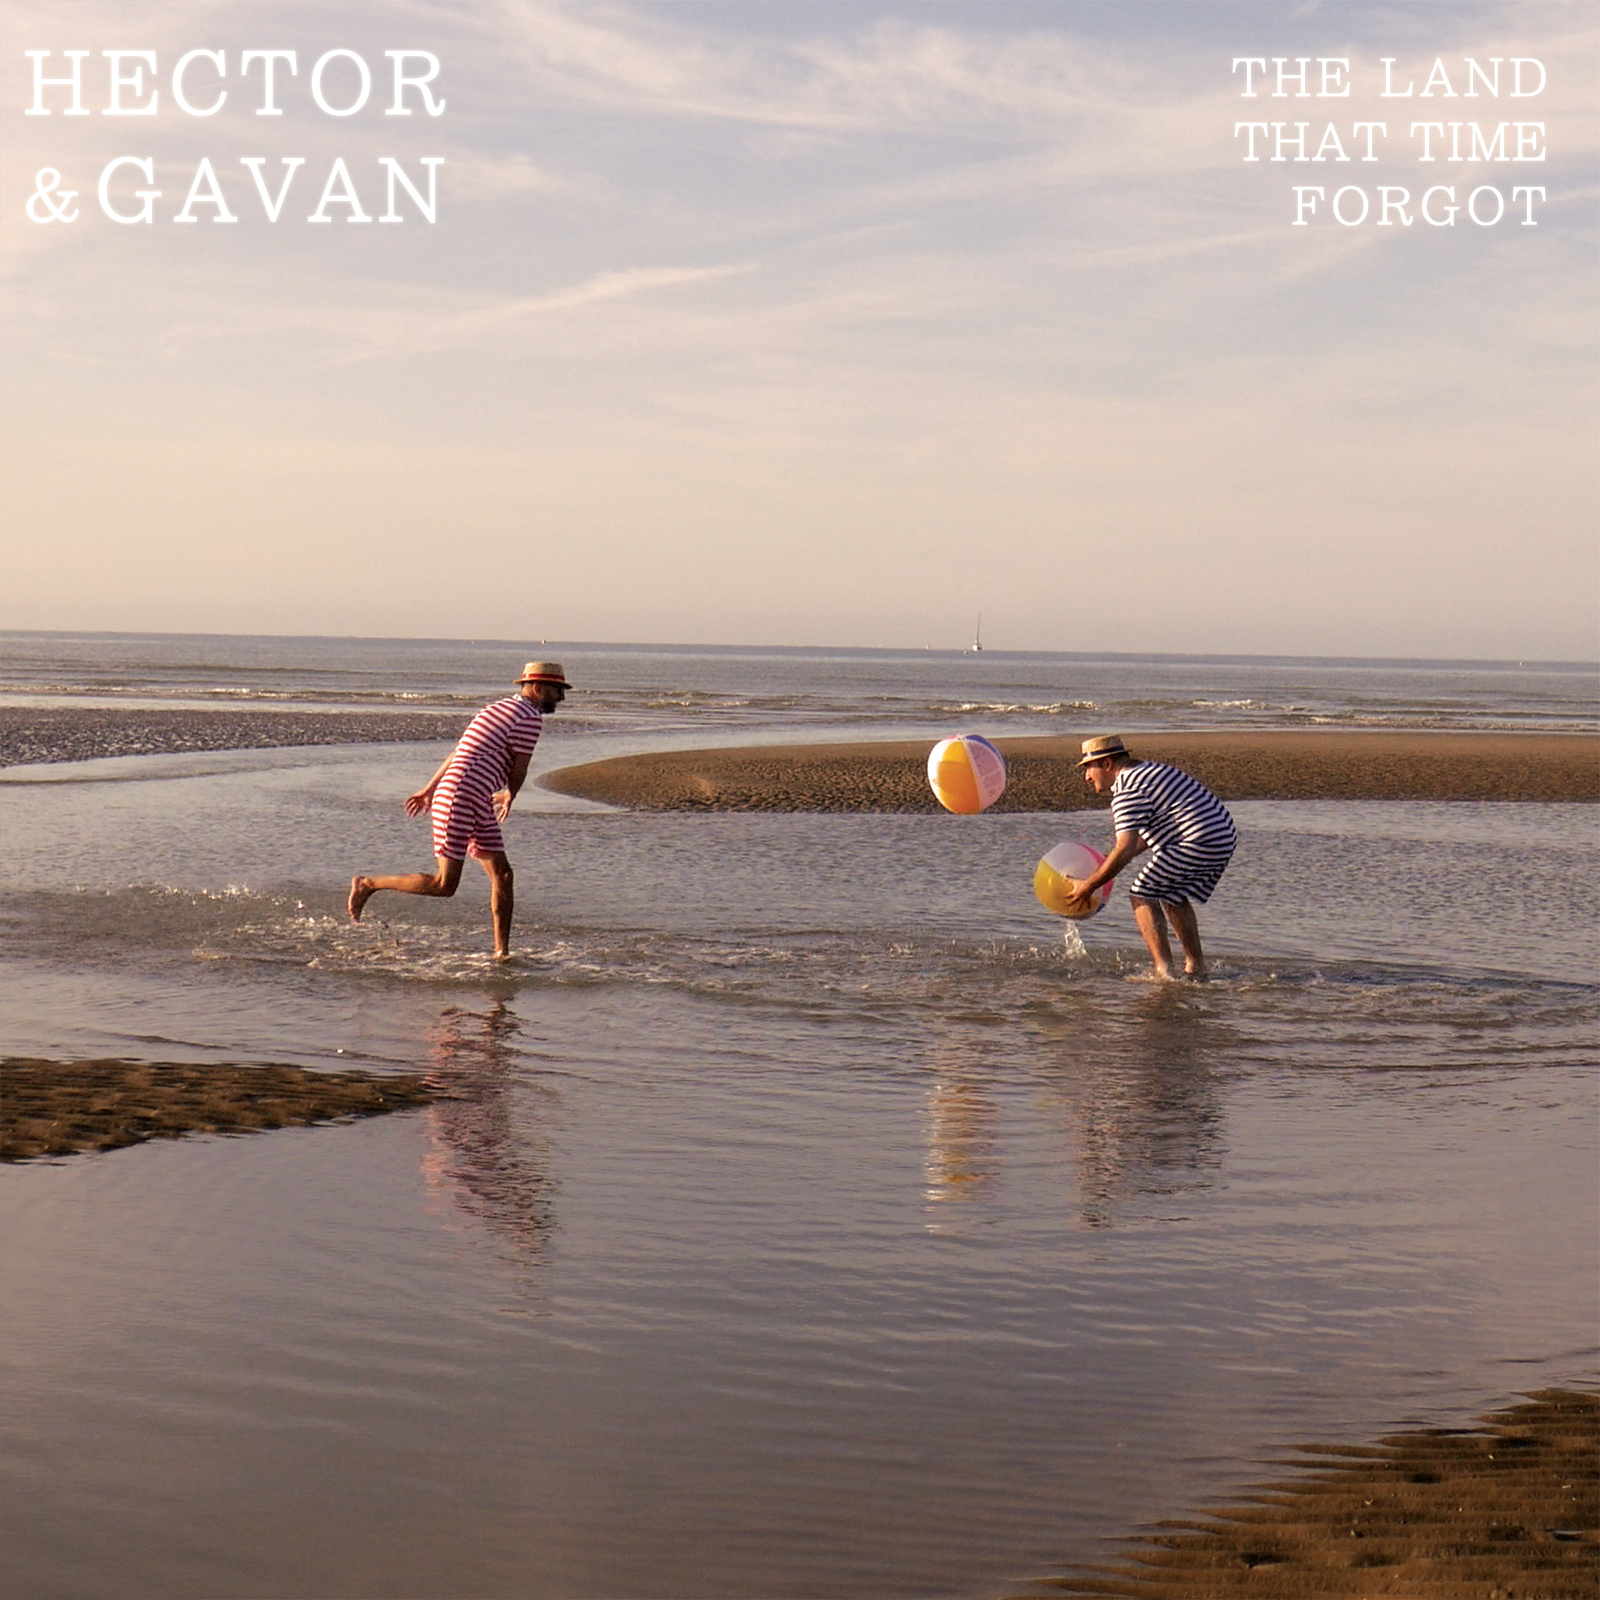 Hector & Gavan - The land that time forgot